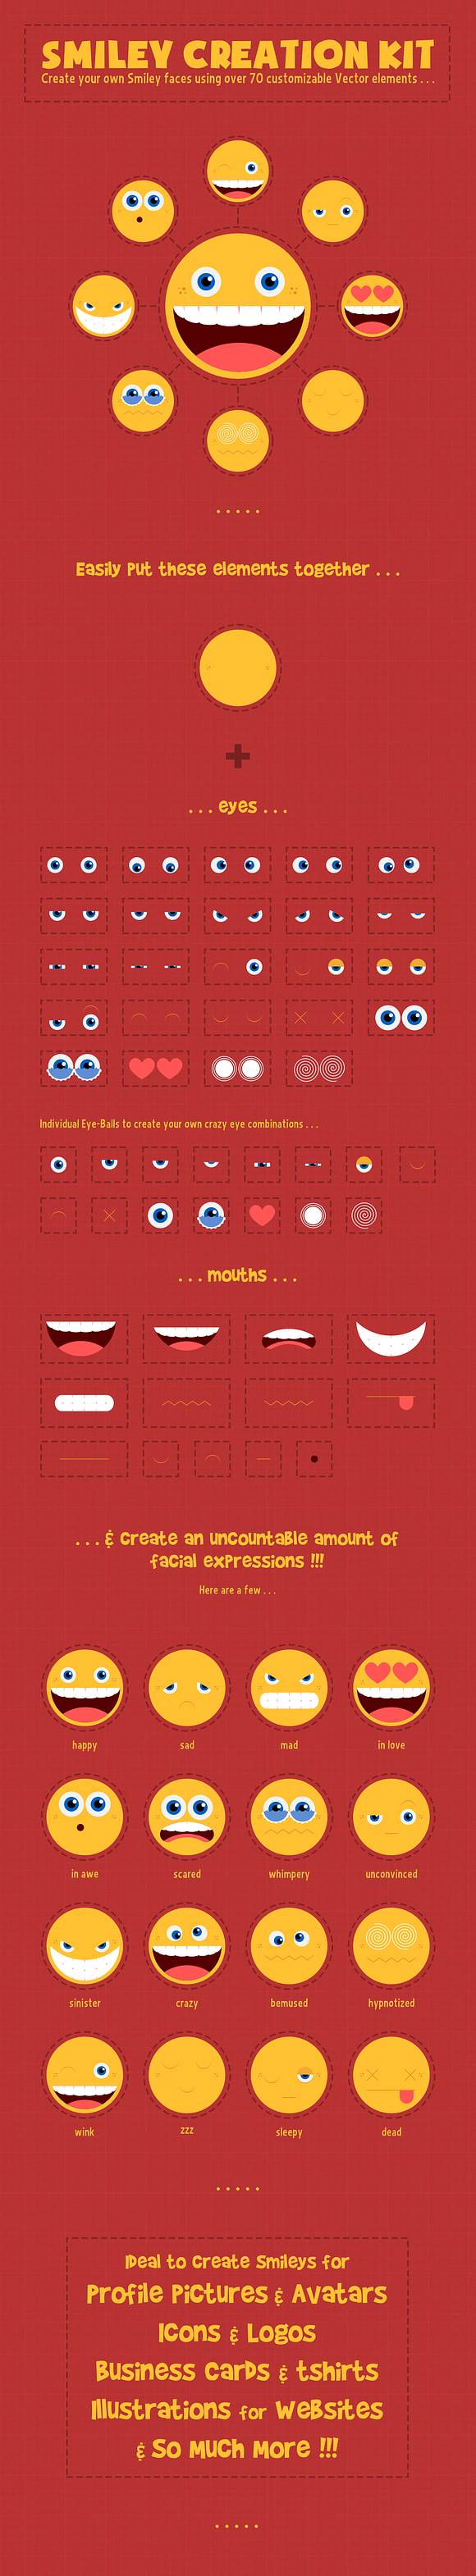 Smiley Creation Kit in Smiley Face Icons - product preview 1